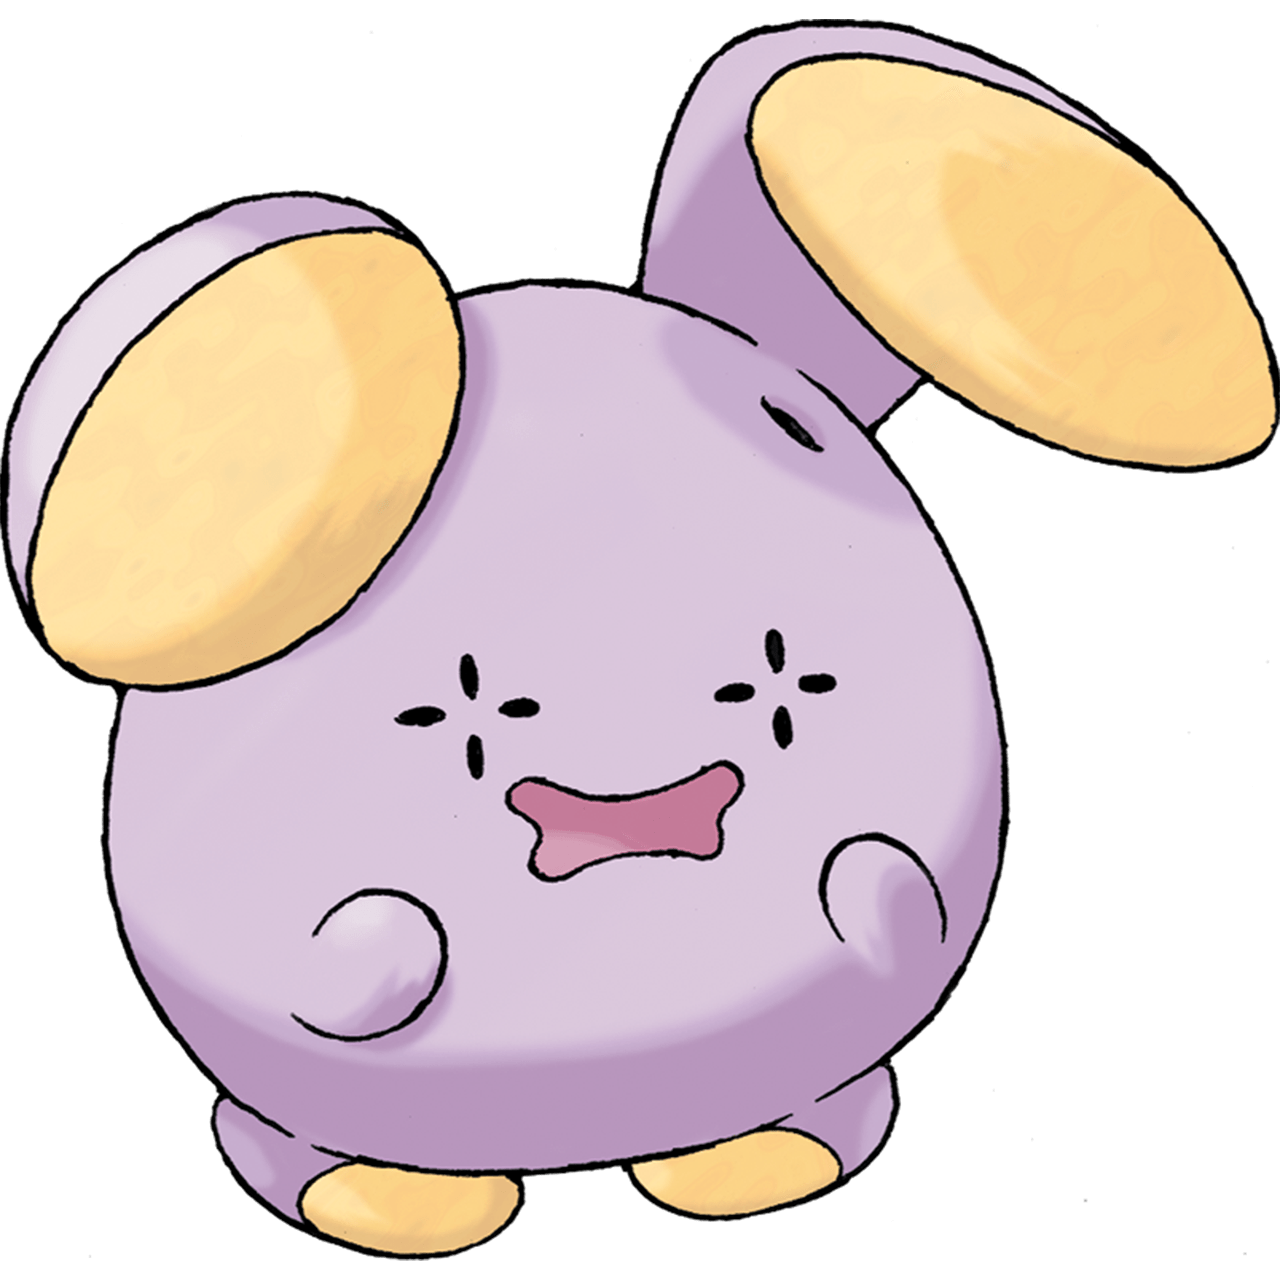  whismur rate that. Whisper clipart shh